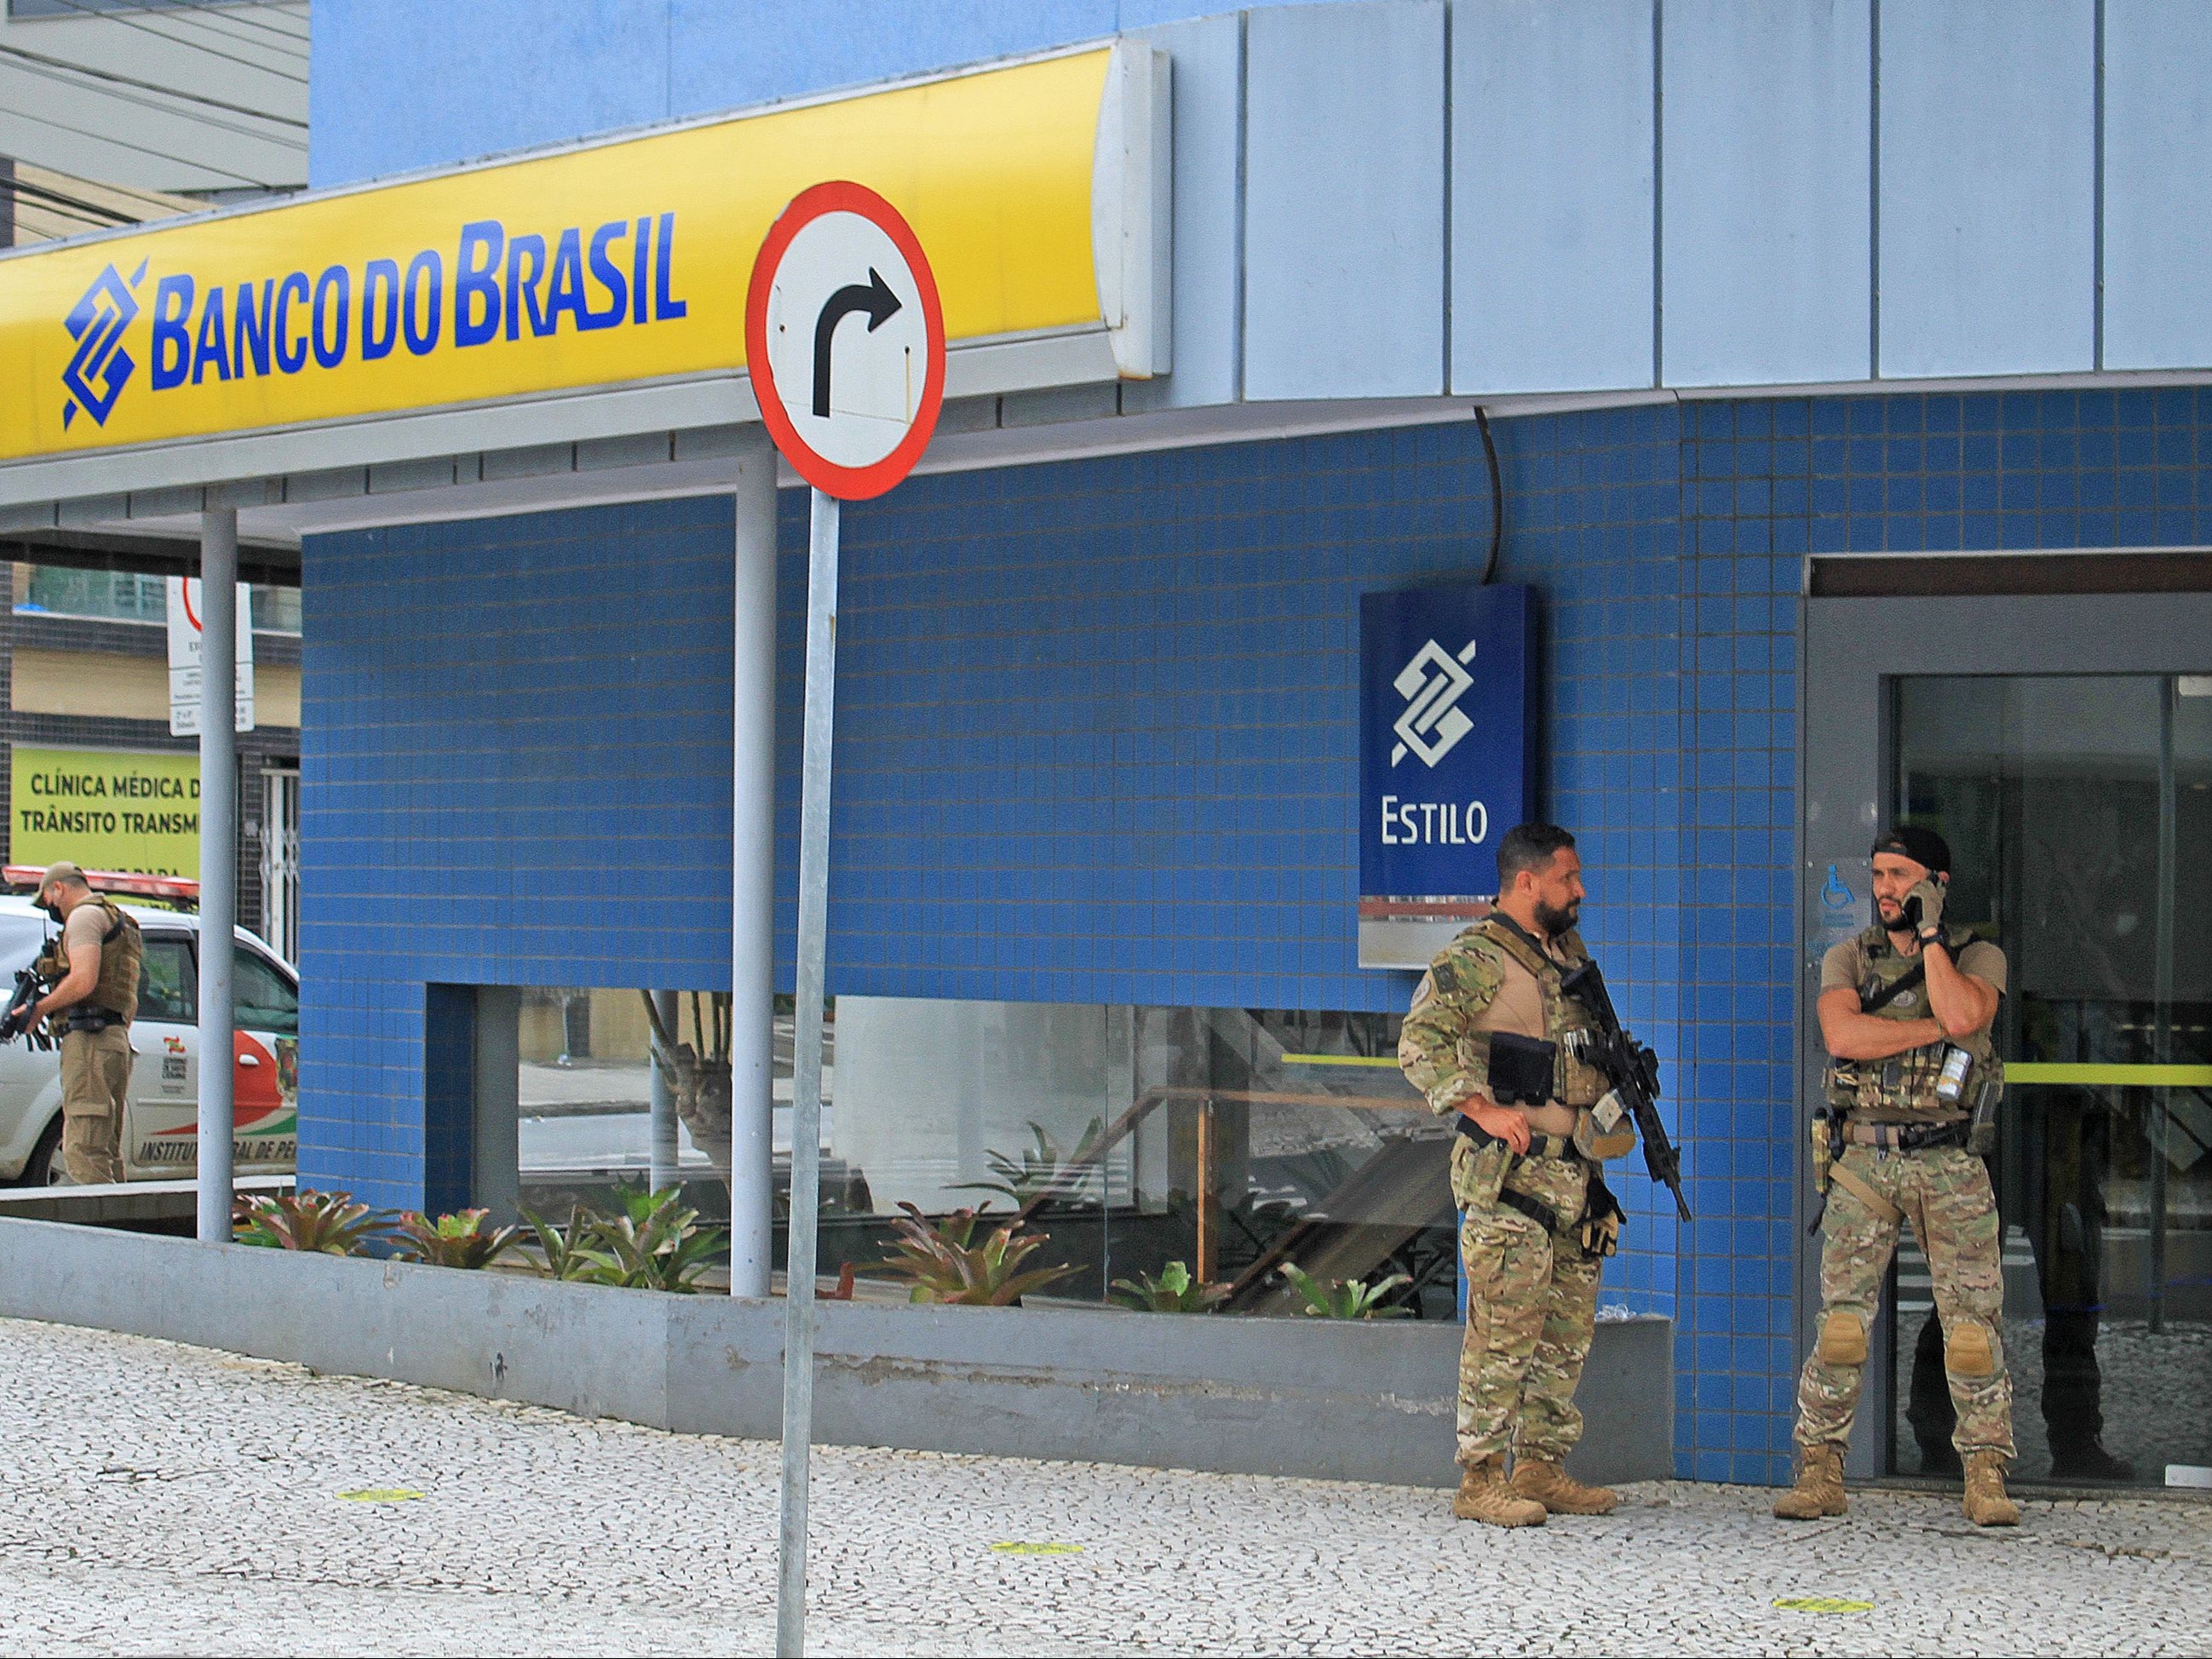 Police officers stand guard outside the bank which robbers attacked just after midnight, in the city of Criciuma